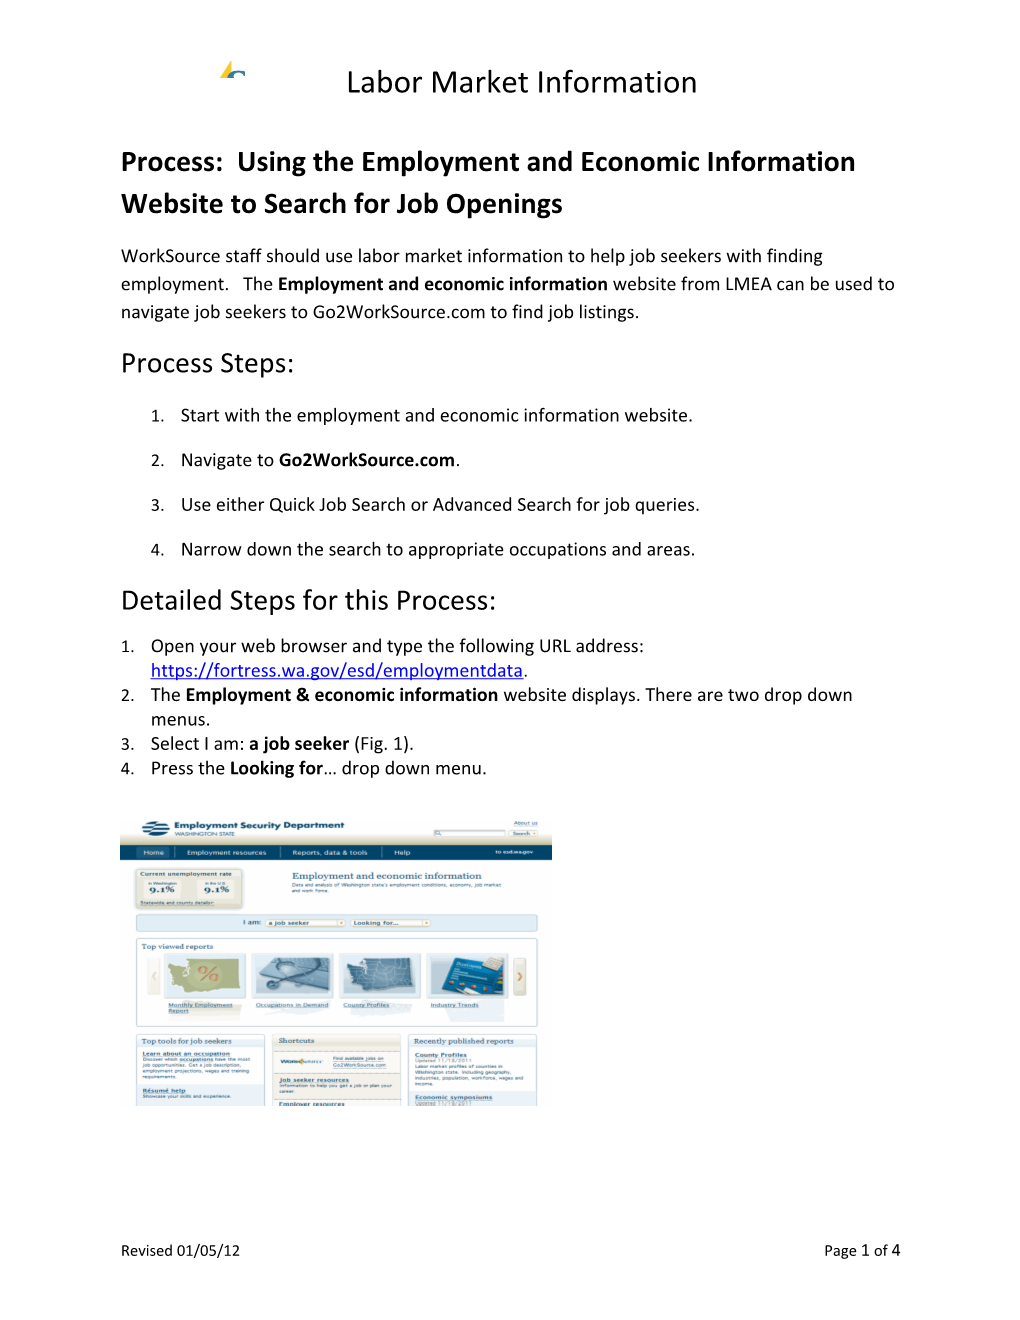 1. Start with the Employment and Economic Information Website